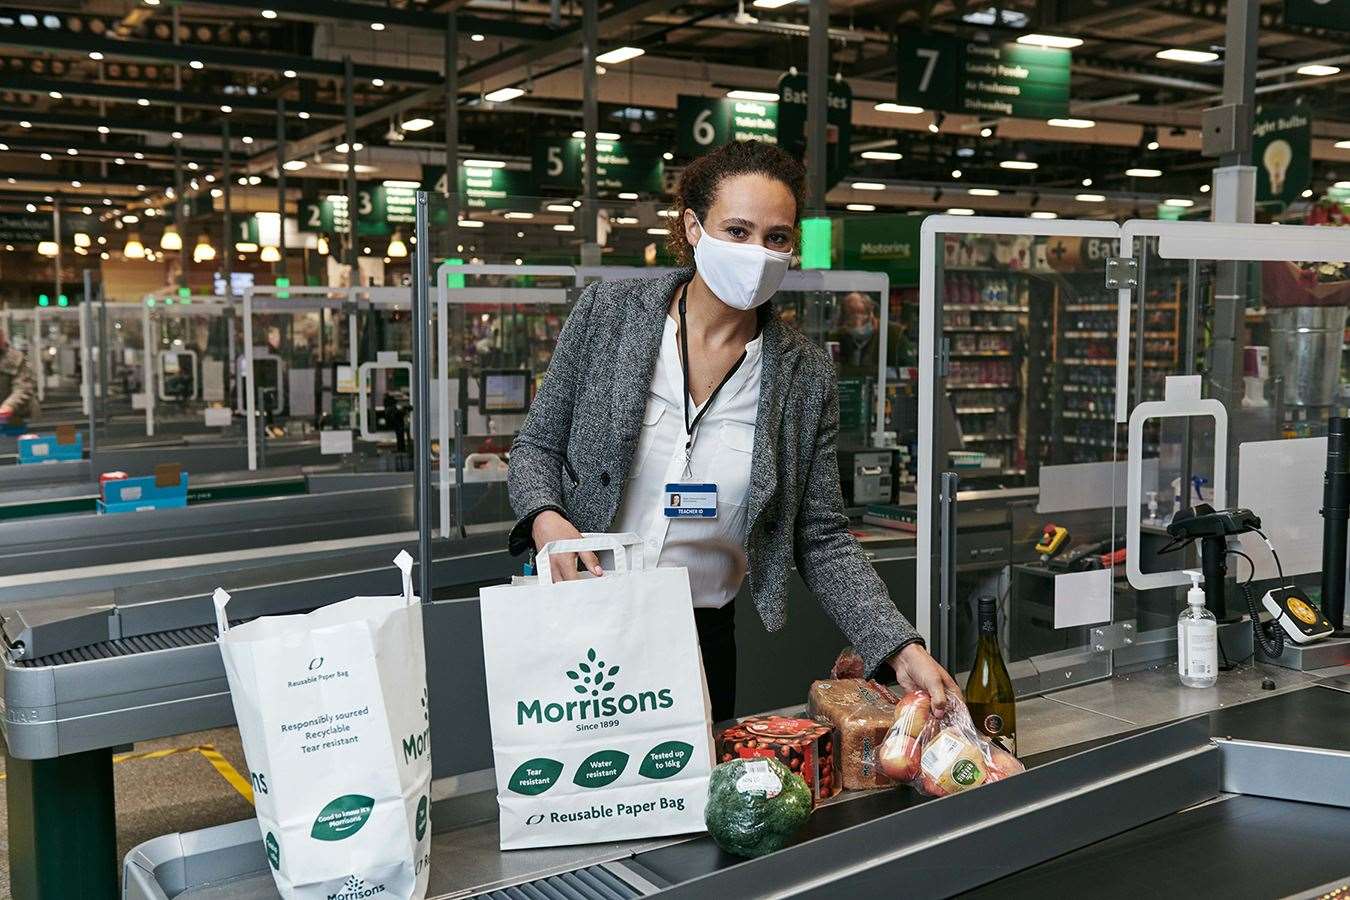 Morrisons is on the lookout for brands and entrepreneurs that have a great idea or product it could sell in its stores